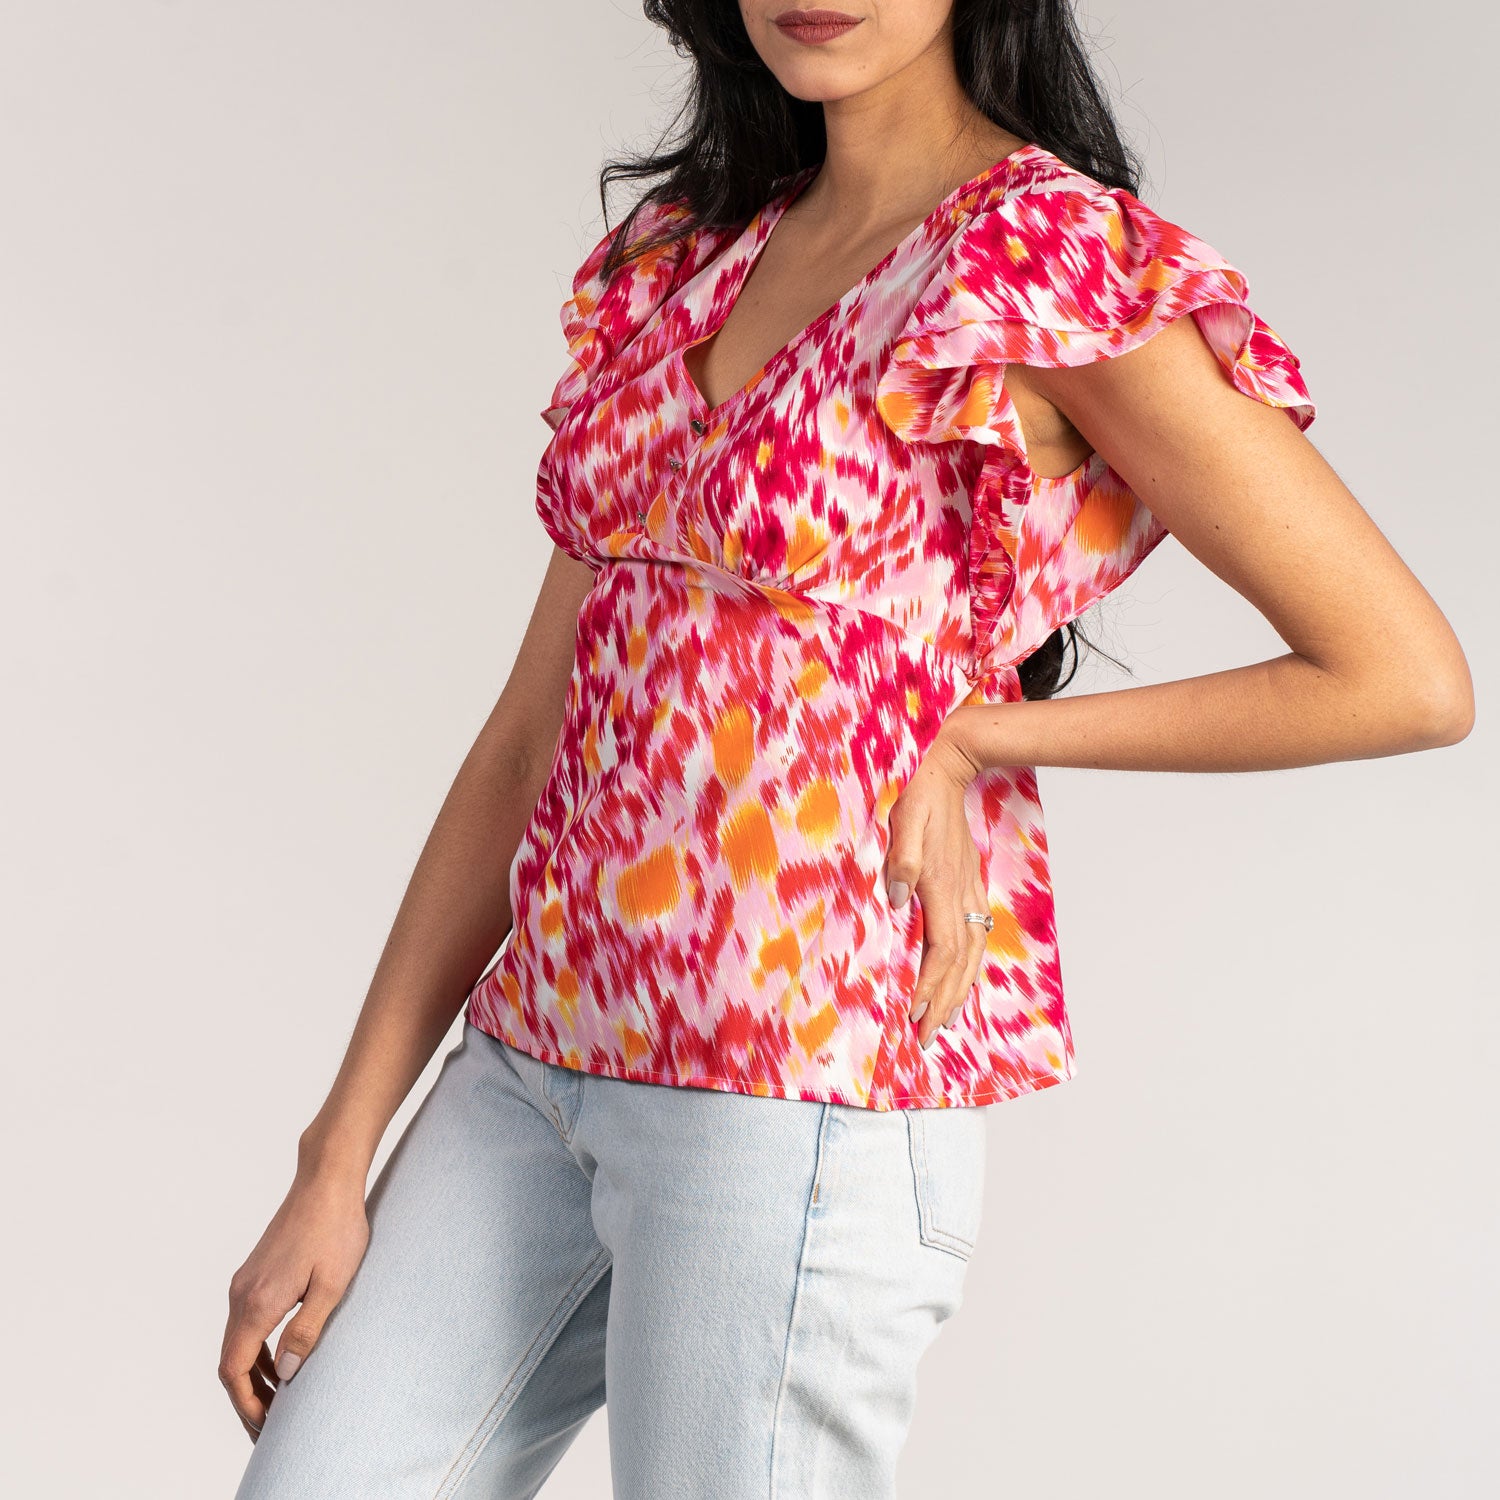 Naoise V Neck Chiffon Top - Red 2 Shaws Department Stores